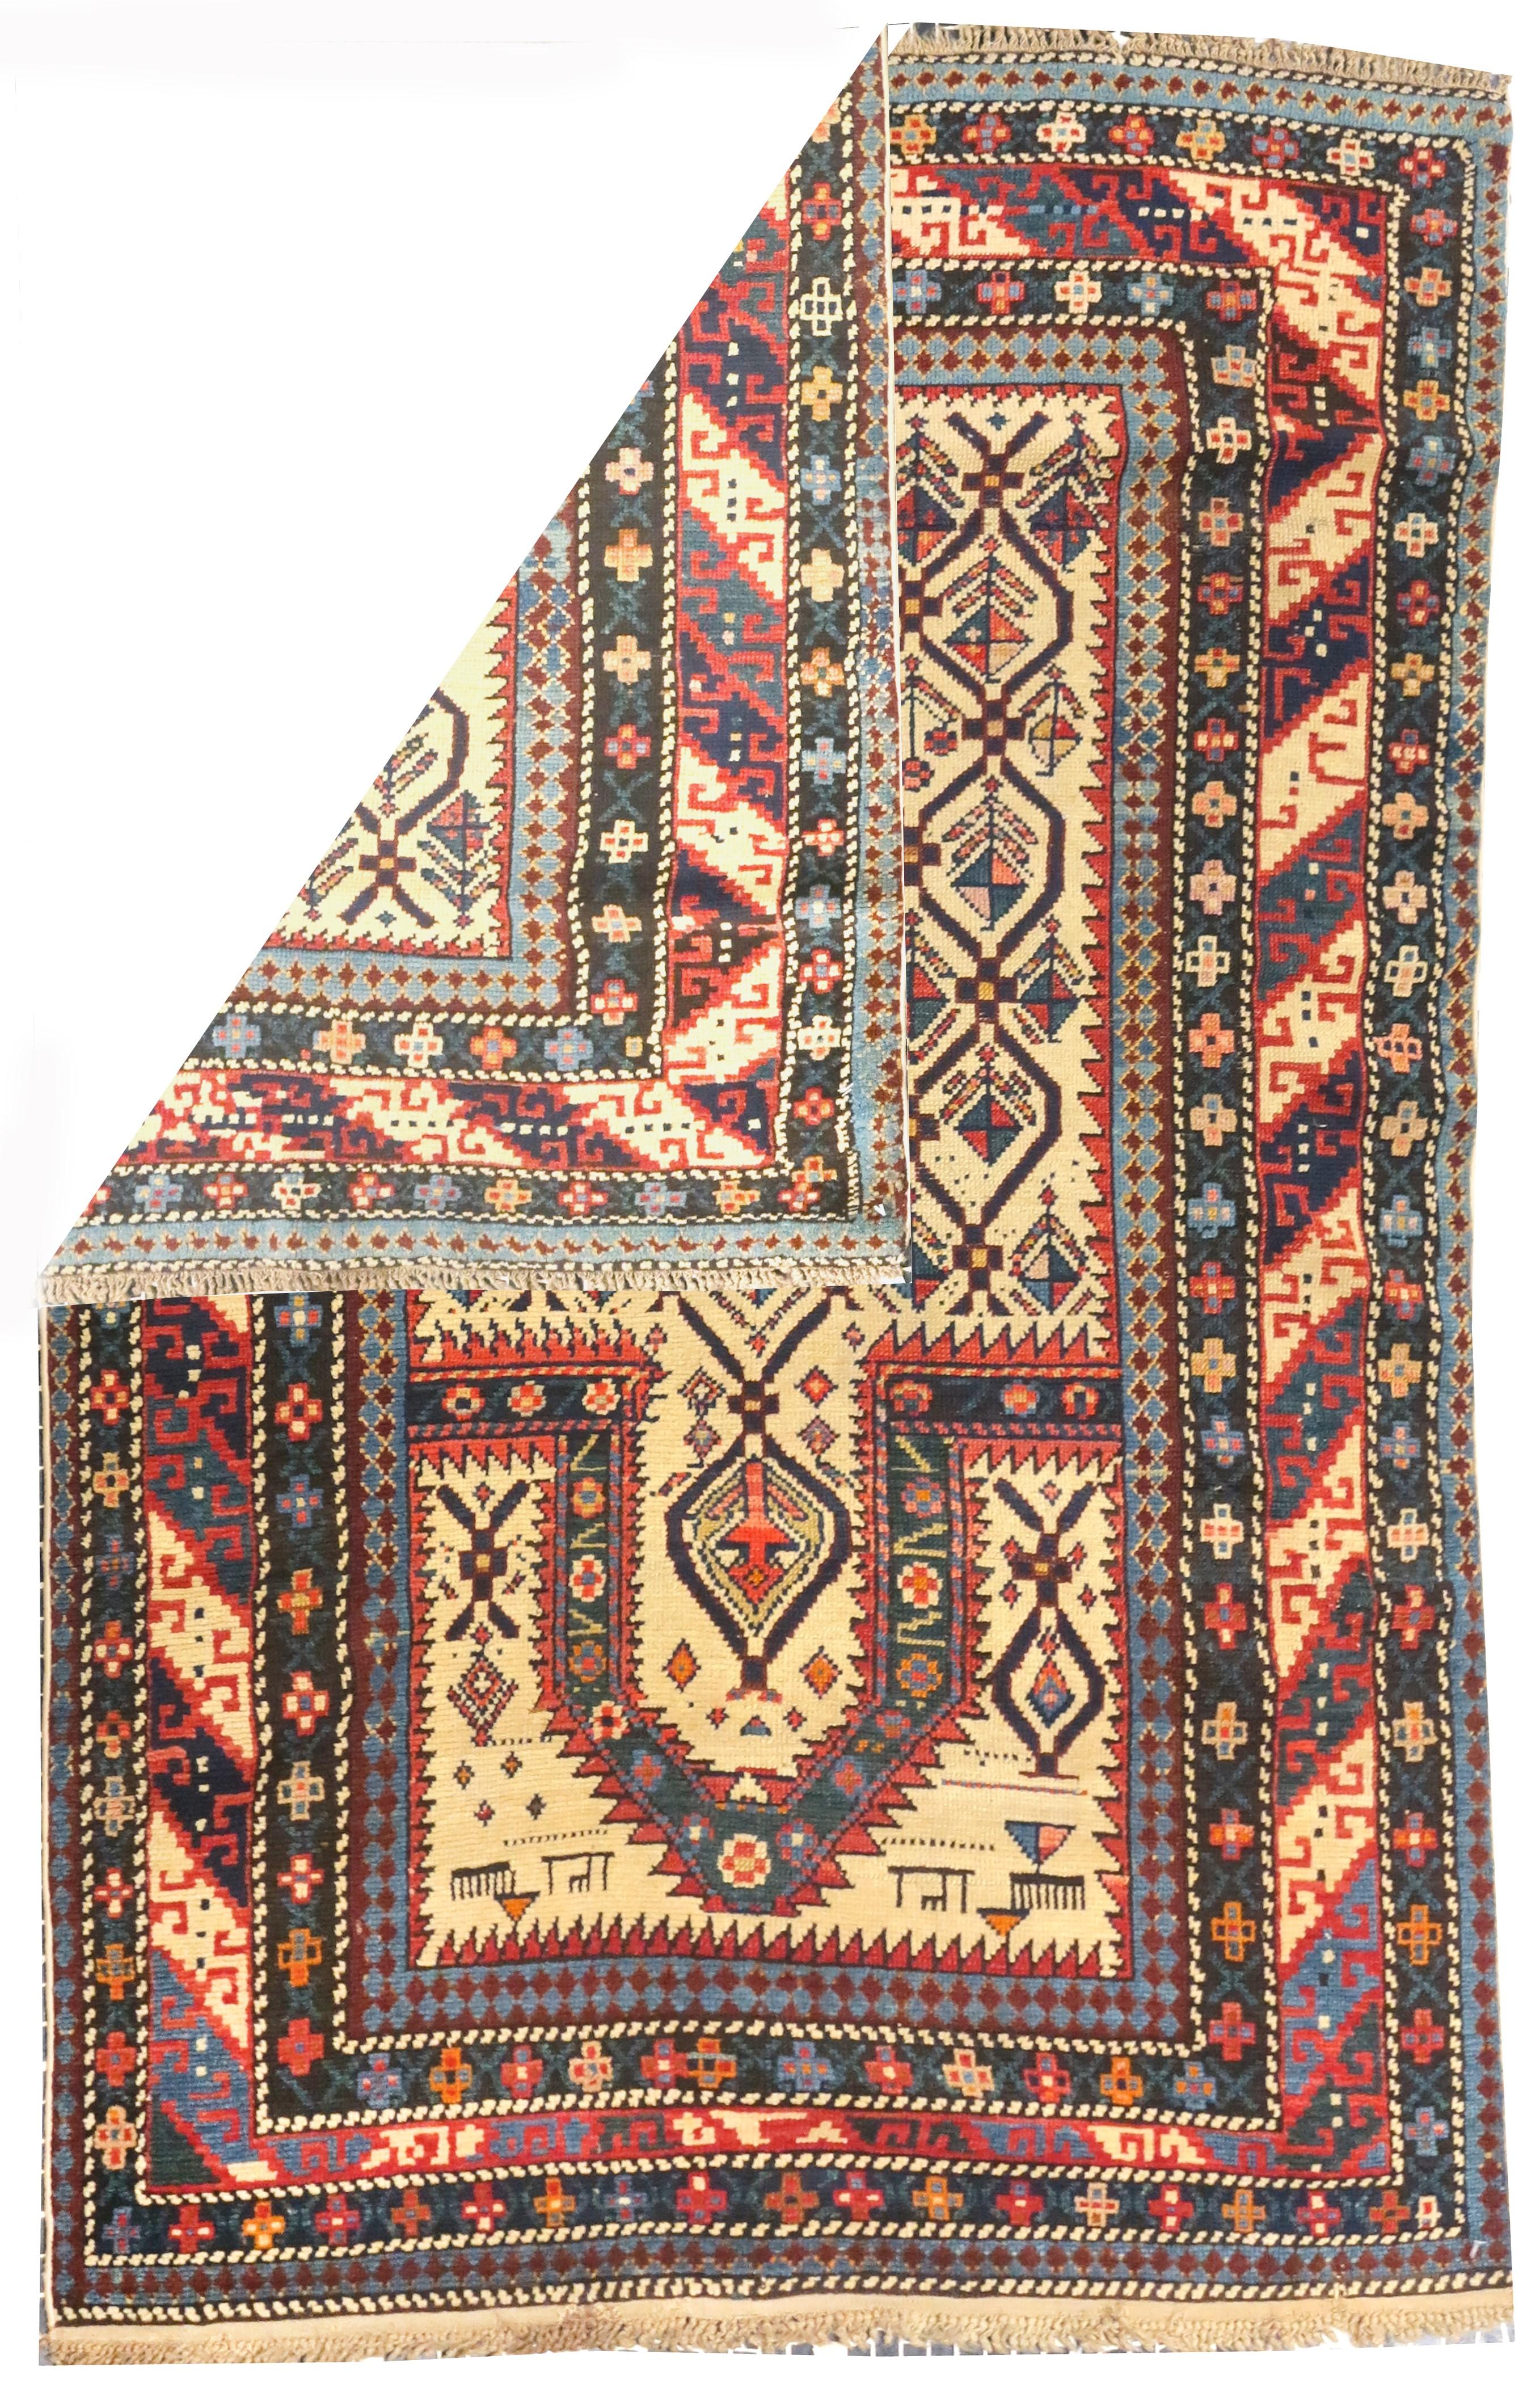 Antique Daghestan Shirvan rug 3'4'' x 5'2''. The narrow ecru field displays a lozenge lattice enclosing a one-way floral pattern, with animals in the spandrels. Serrated niche arch and field edging. The main border shows geometric slanted